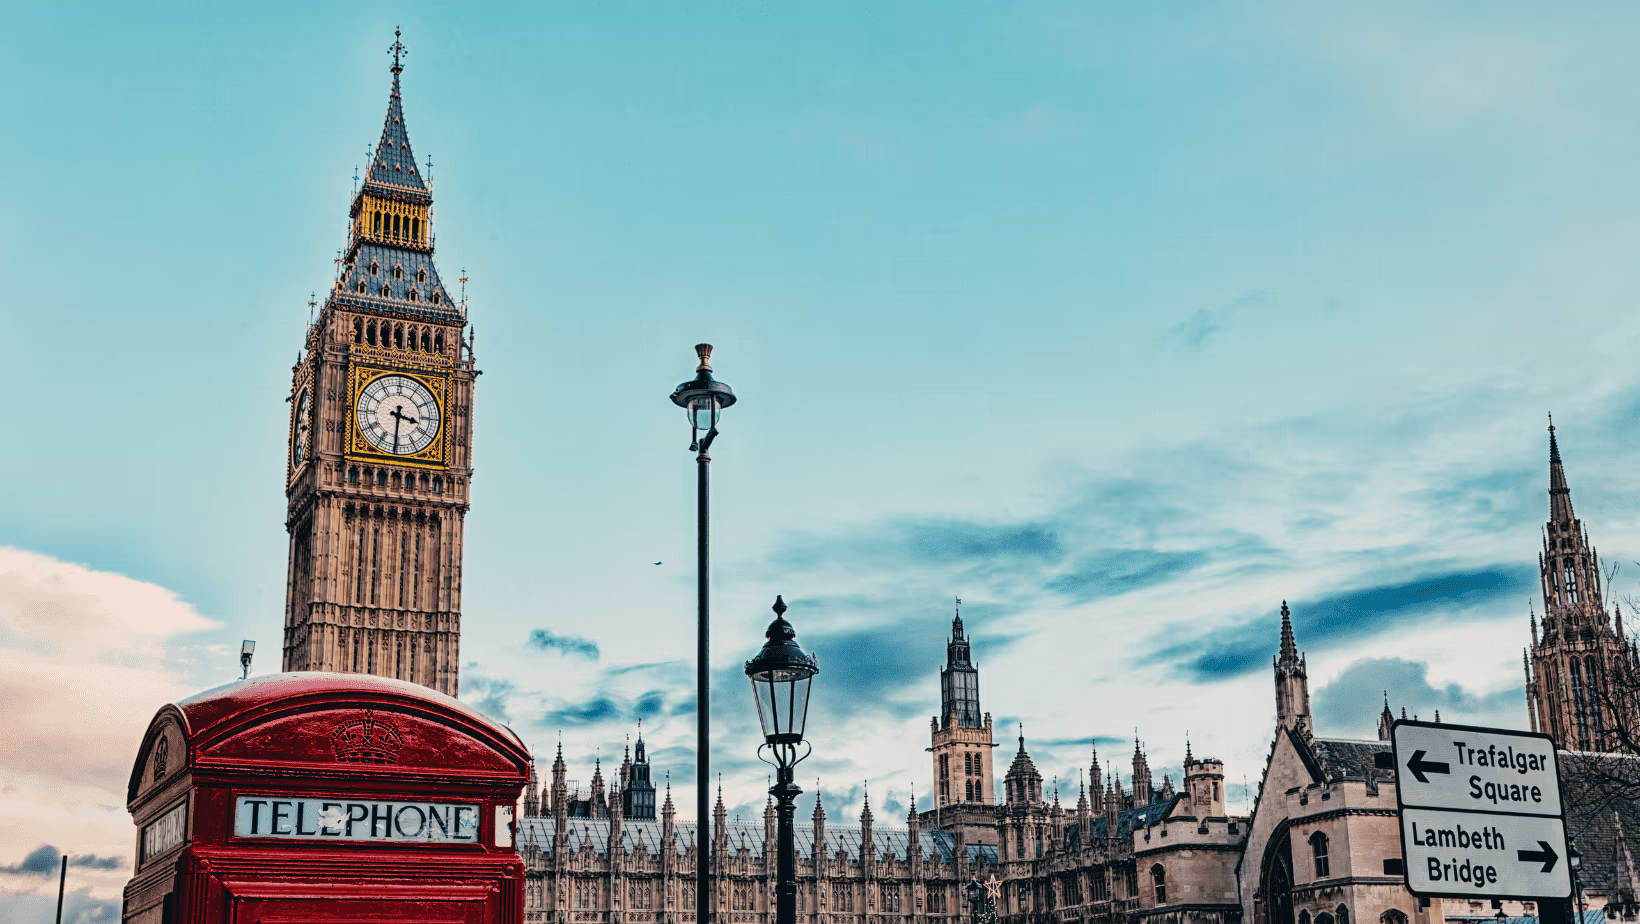 The famous clock of London as a must-see attraction